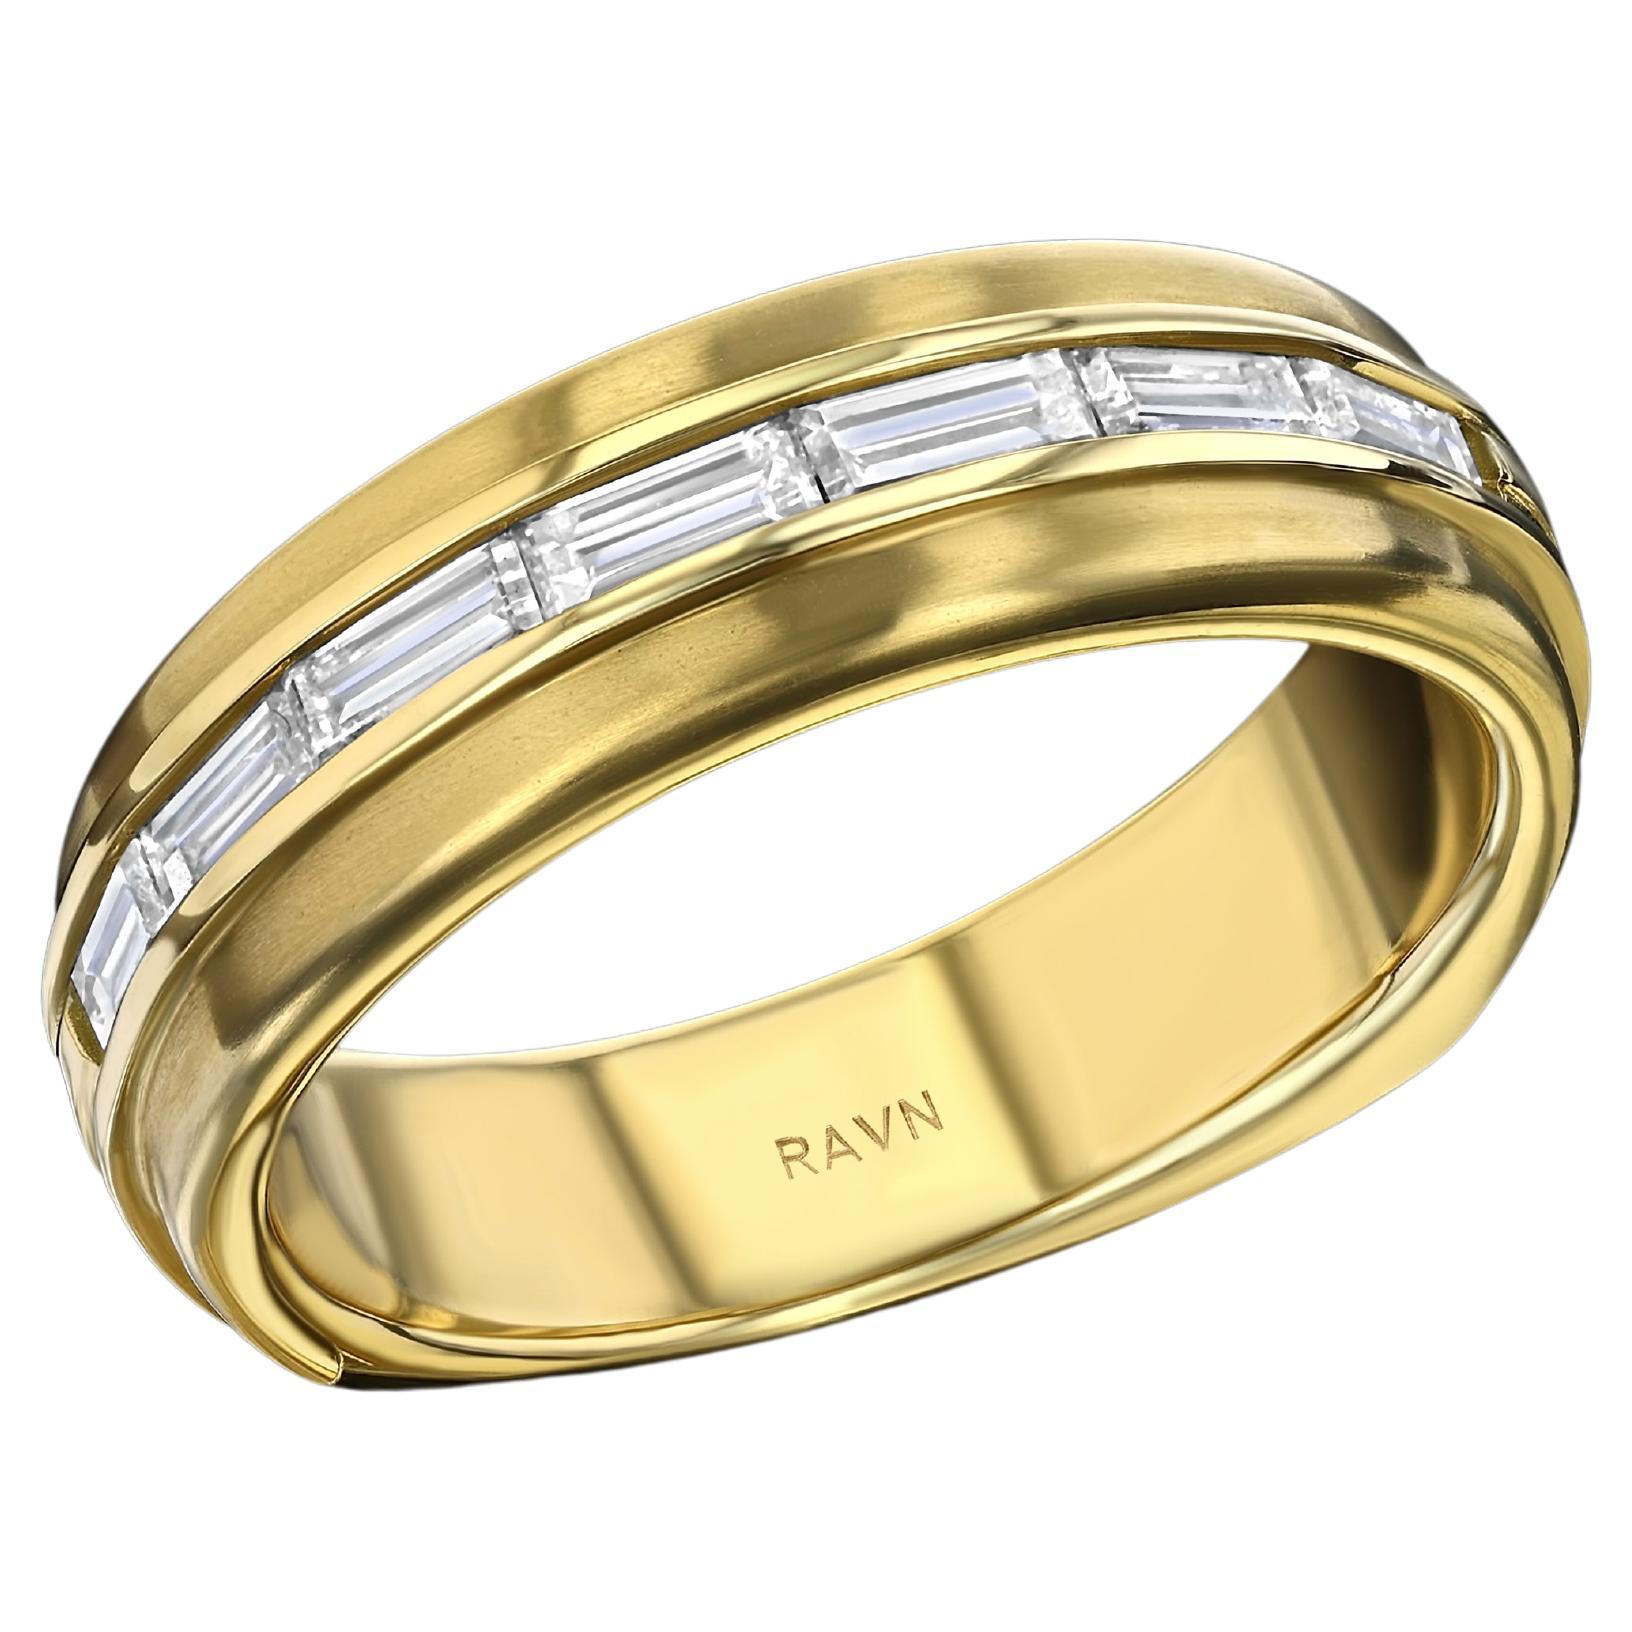 House of RAVN, 18k Yellow Gold, Men's Euro Band, with 7 Baguette Diamonds